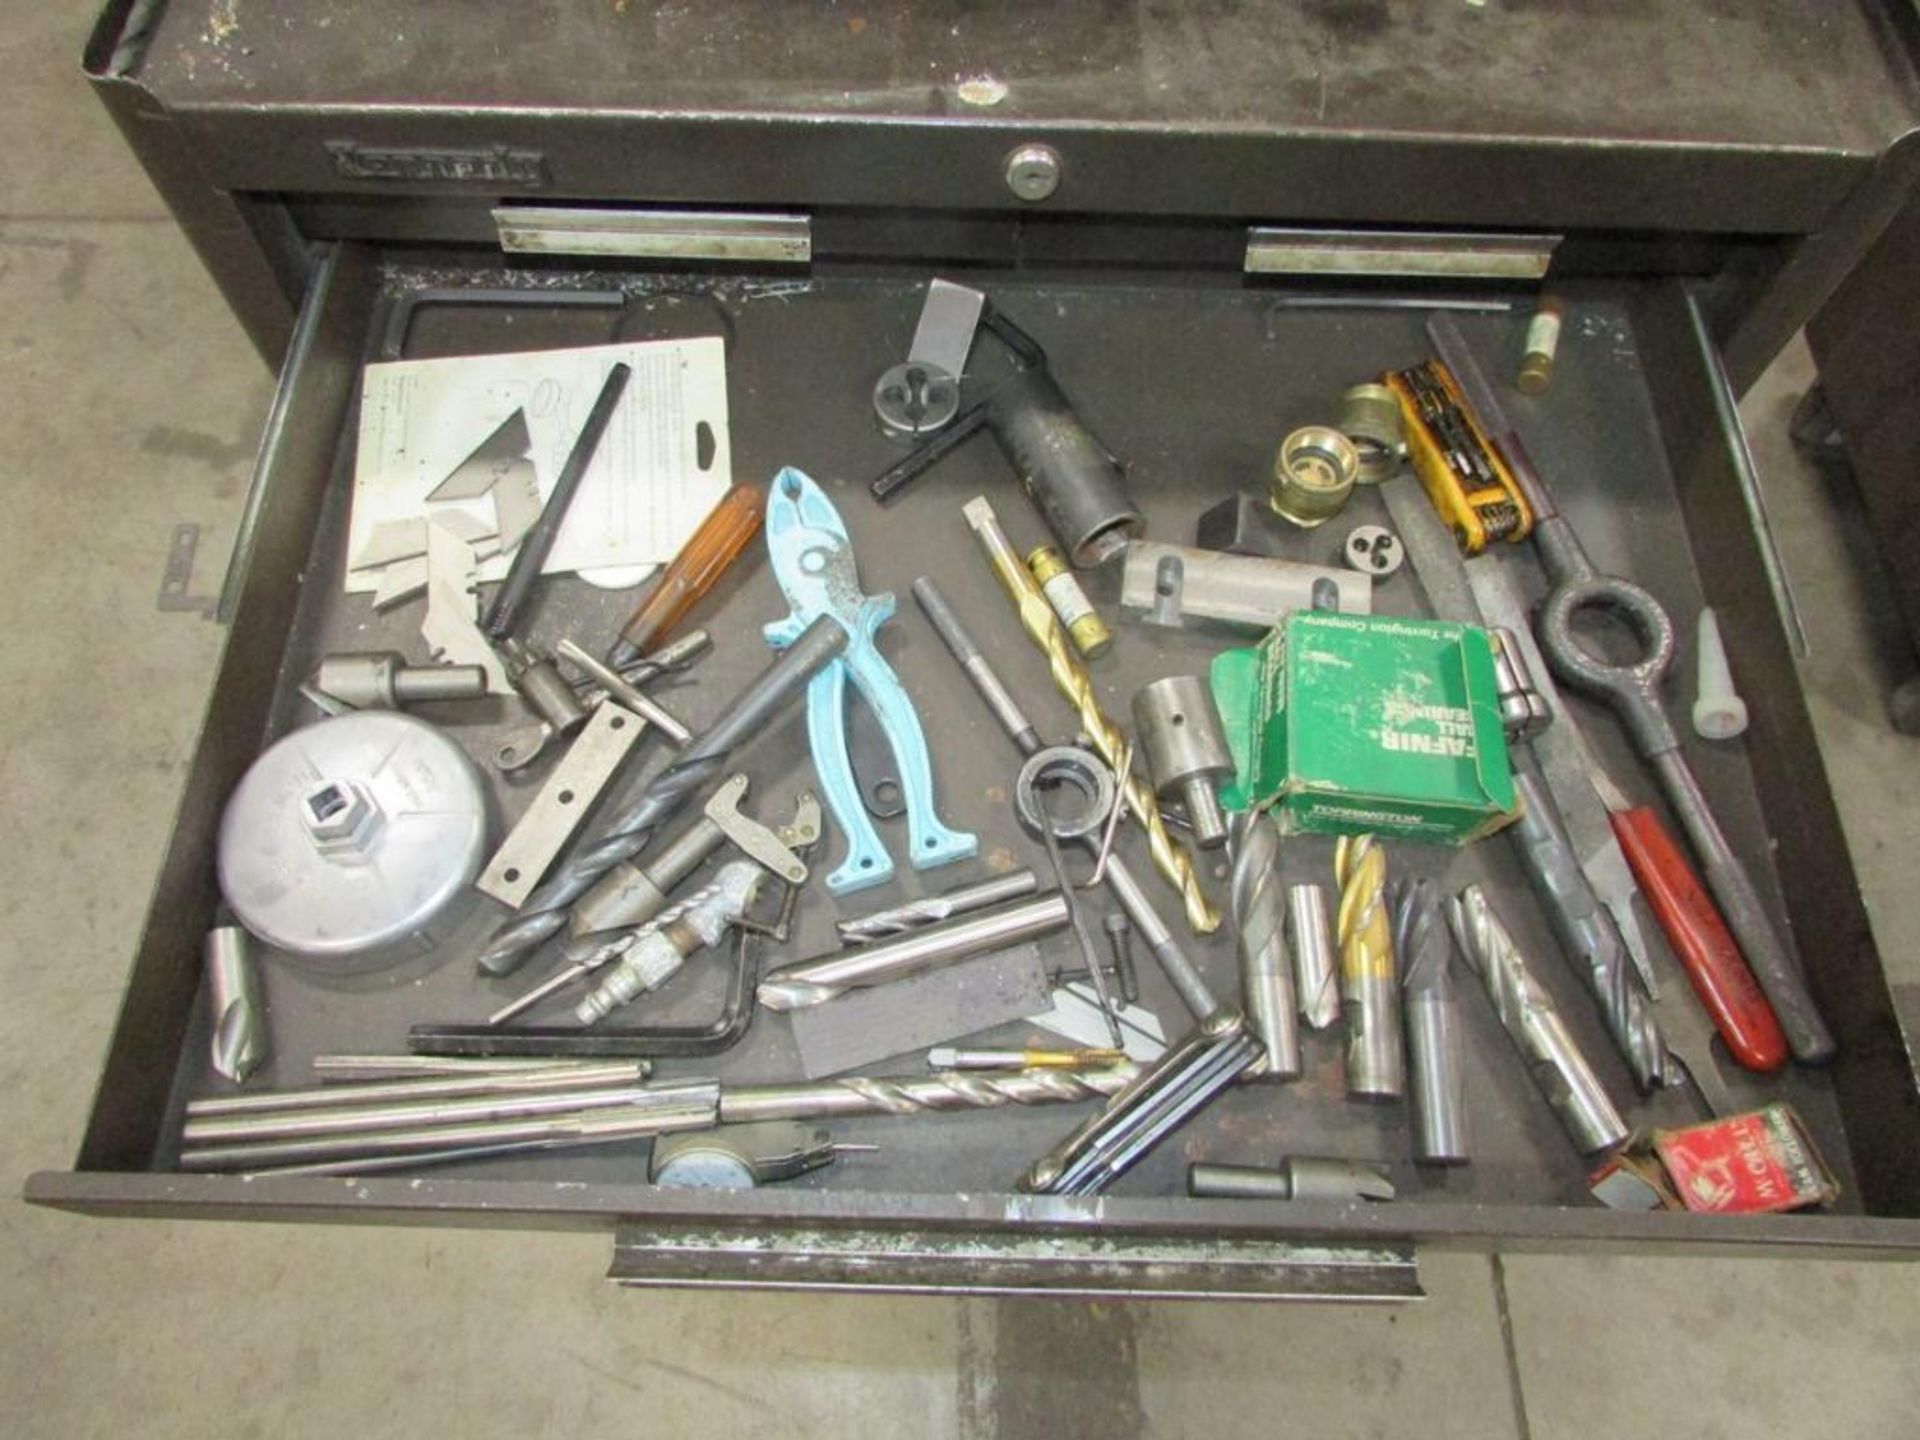 Kennedy 6-Drawer Rolling Tool Box with Open Top 2-Drawer Tool Box, Assorted Hand Tools and Contents - Image 4 of 7